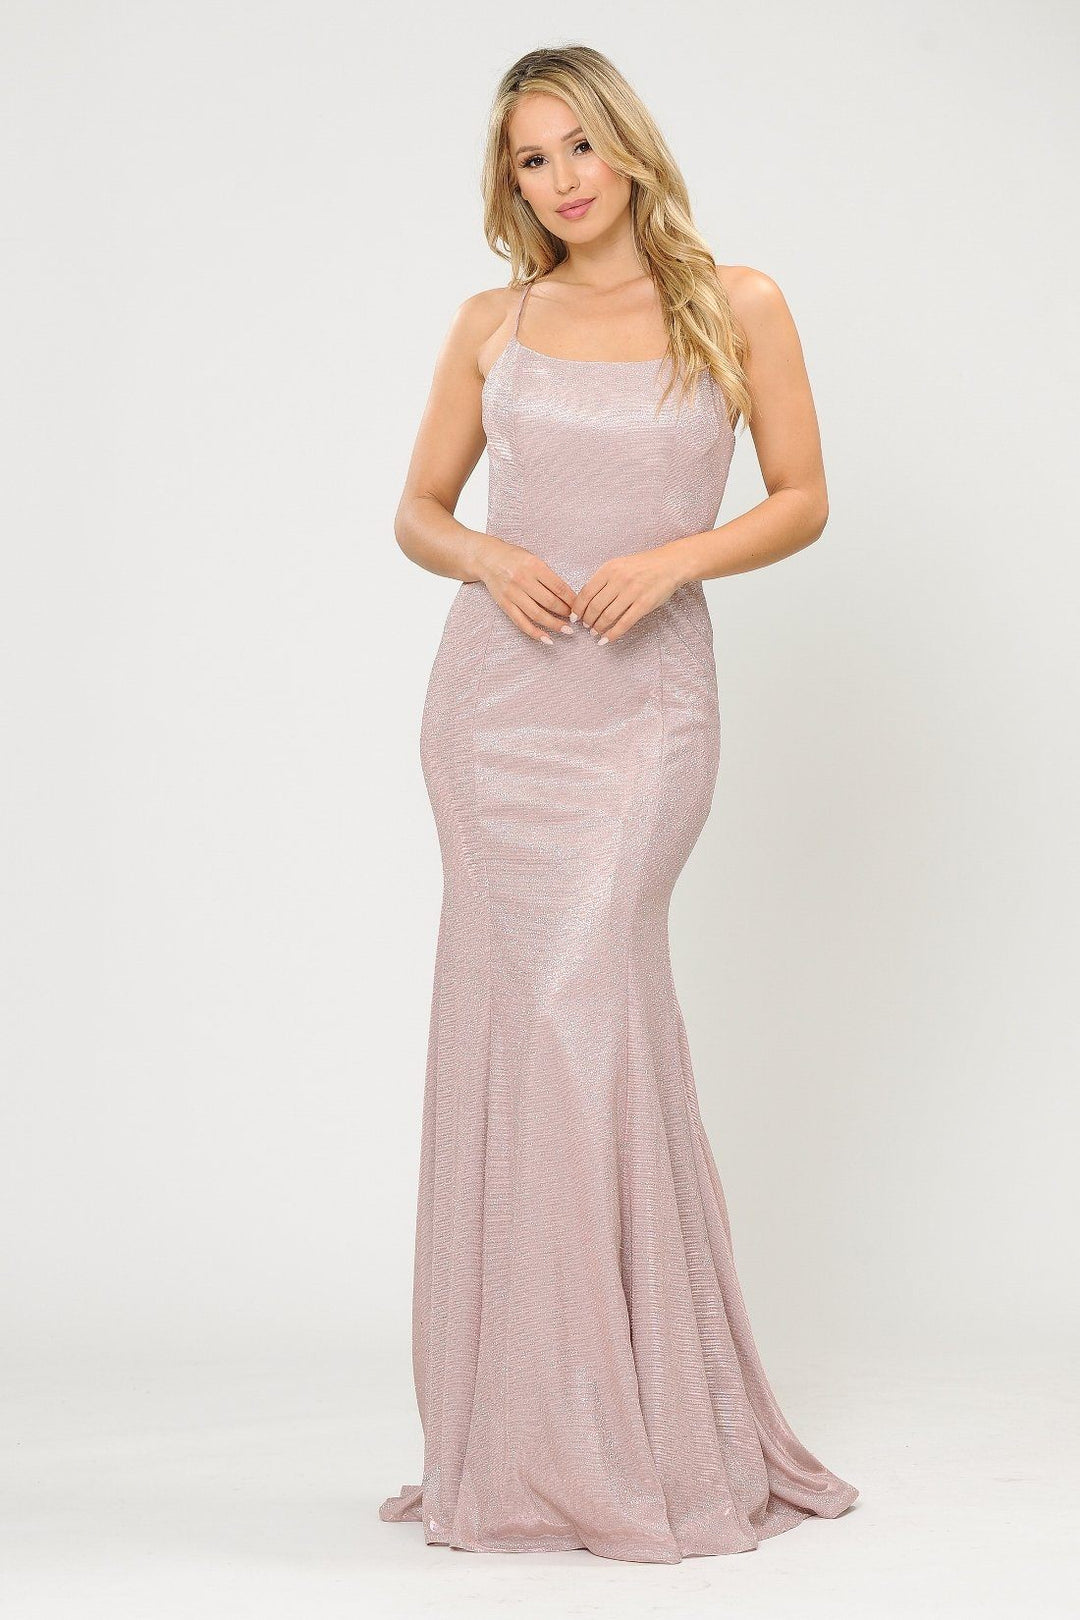 Long Glitter Mermaid Dress with Open Back by Poly USA 8666